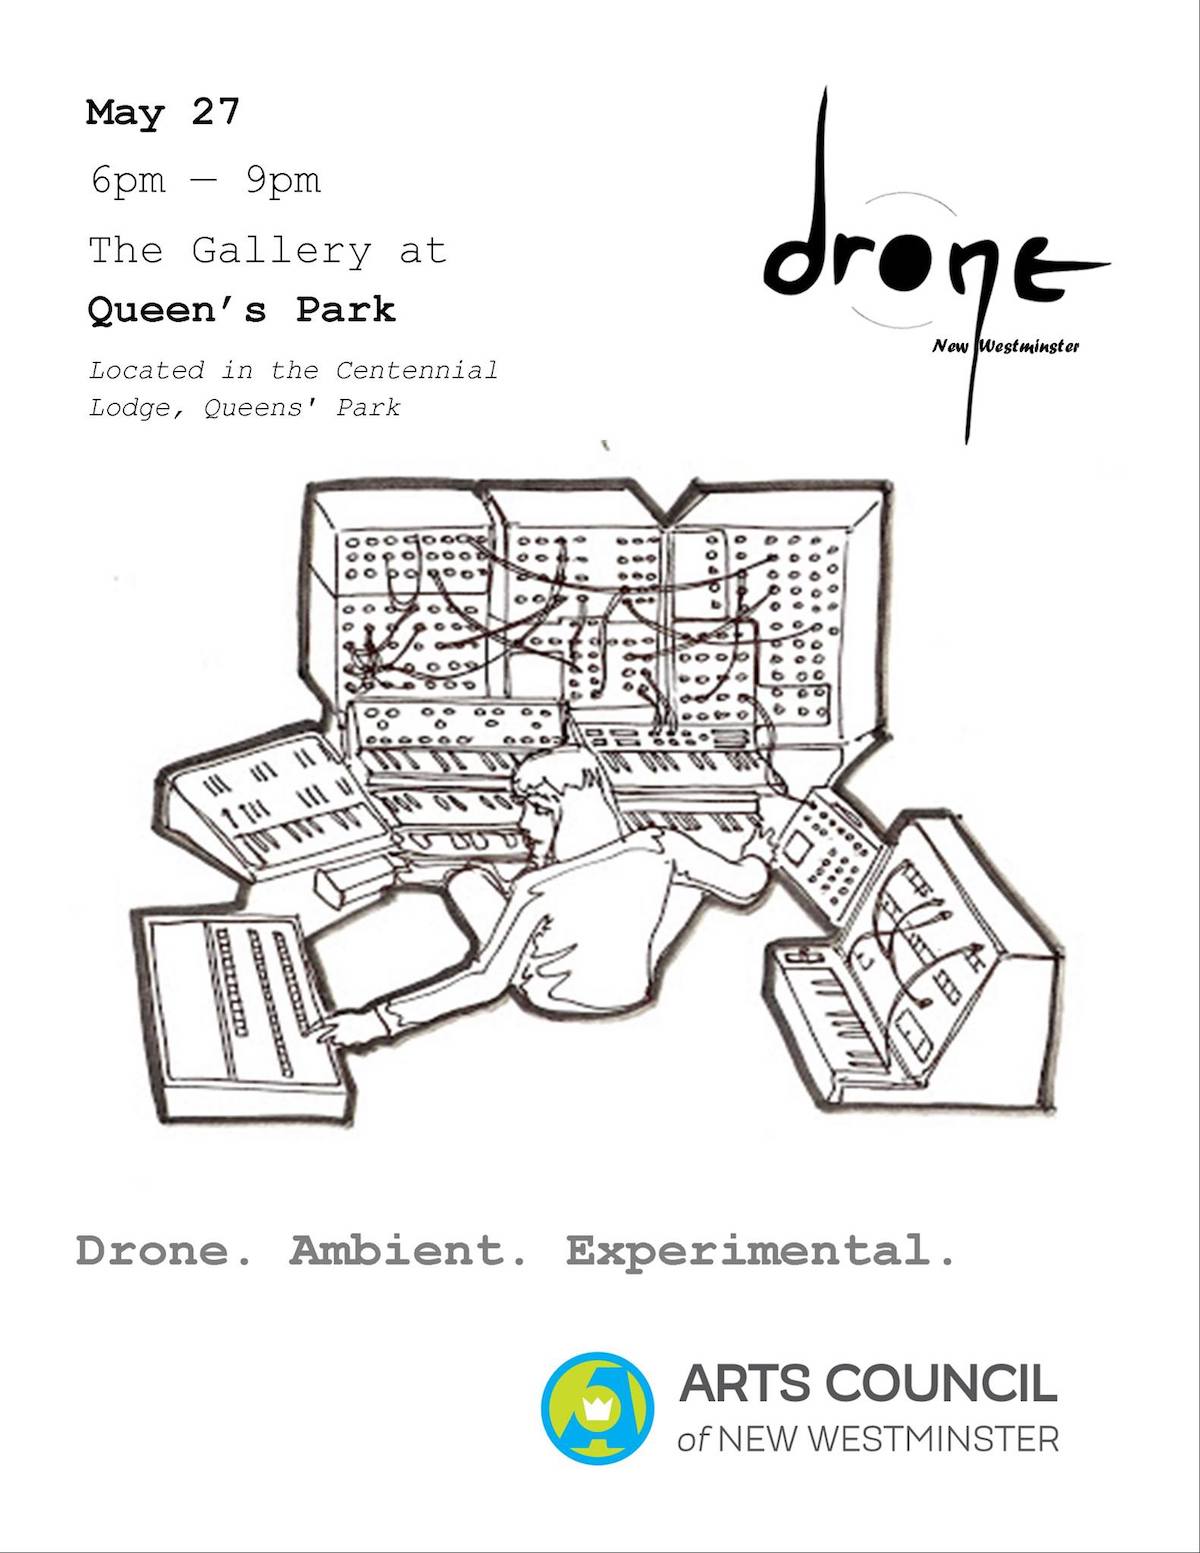 A drawing of a person creating drone music